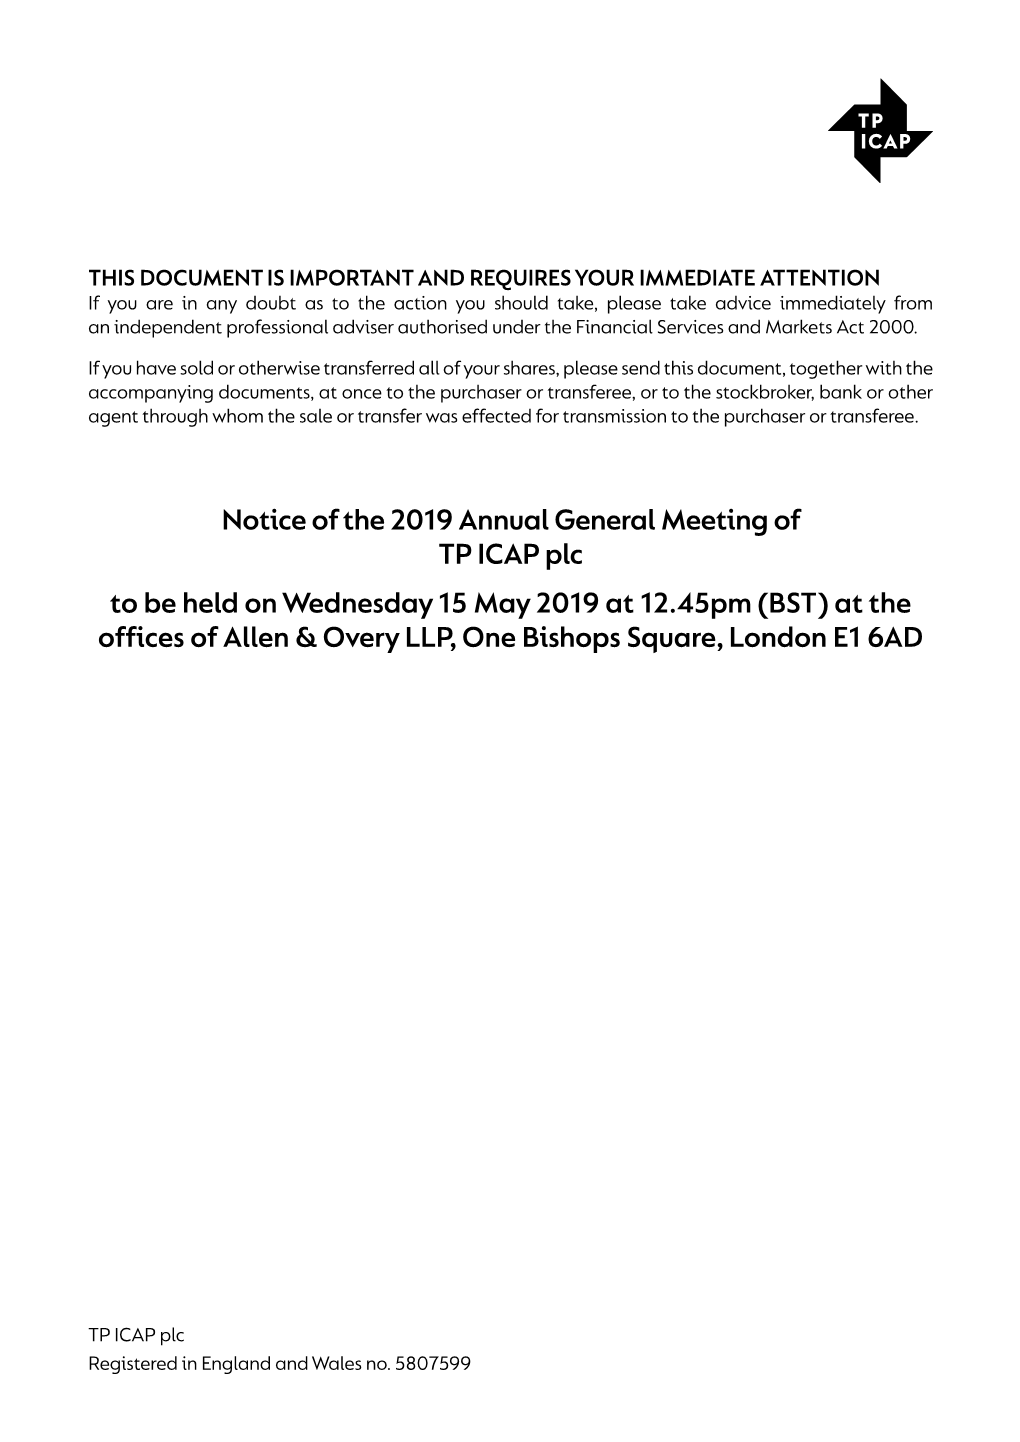 Notice of the 2019 Annual General Meeting of TP ICAP Plc to Be